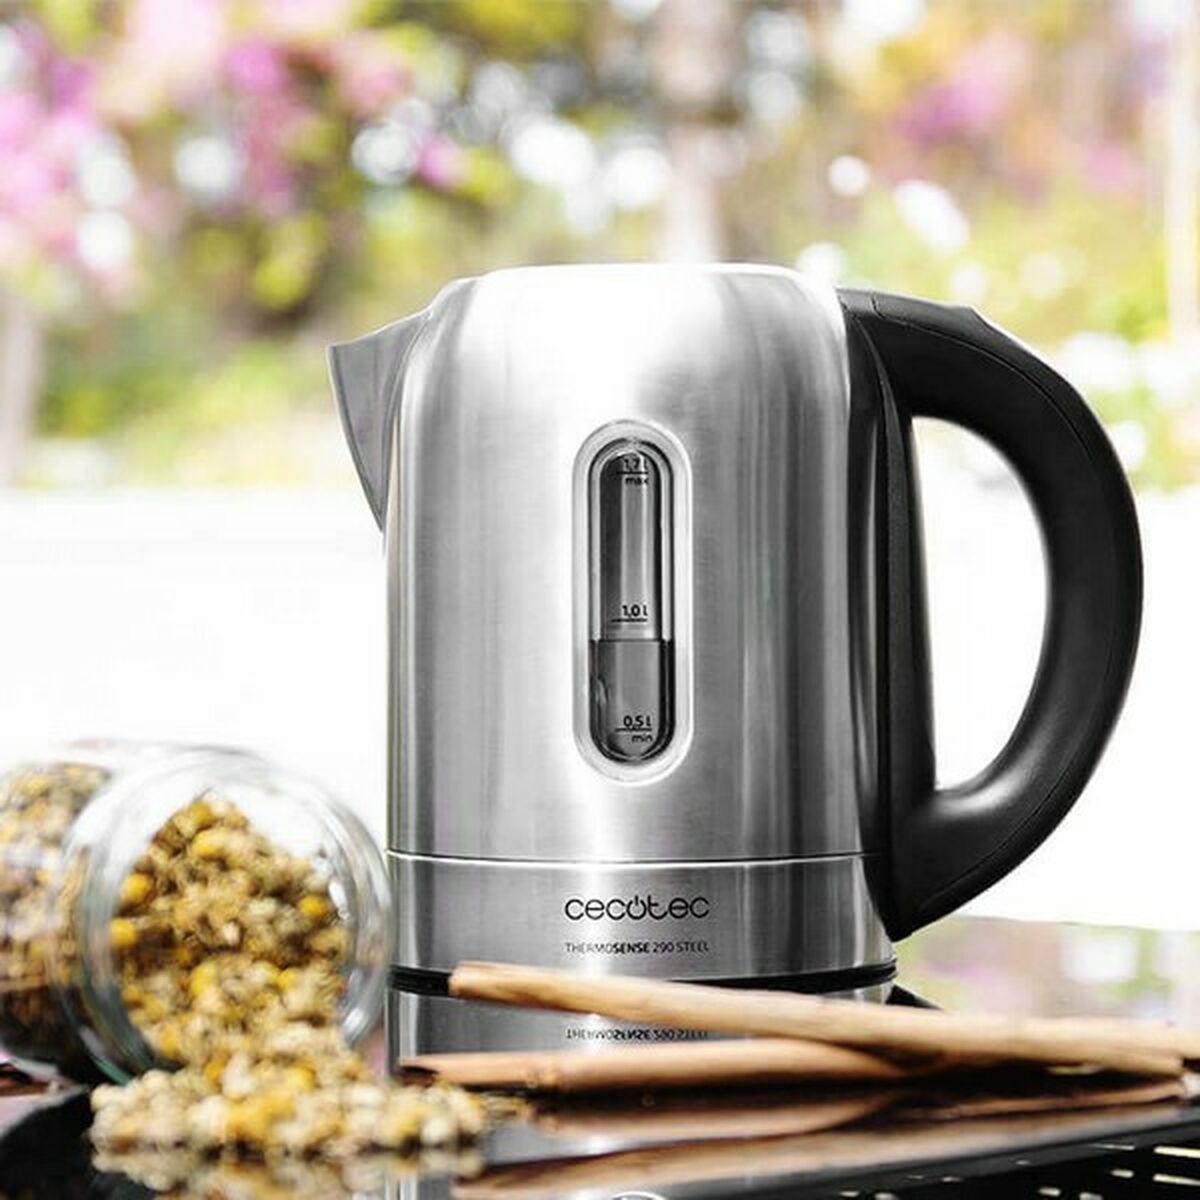 Waterkoker Cecotec ThermoSense 290 Steel 2200W 1,7L Roestvrij staal Staal 2200 W 1850-2200 W 1,7 L